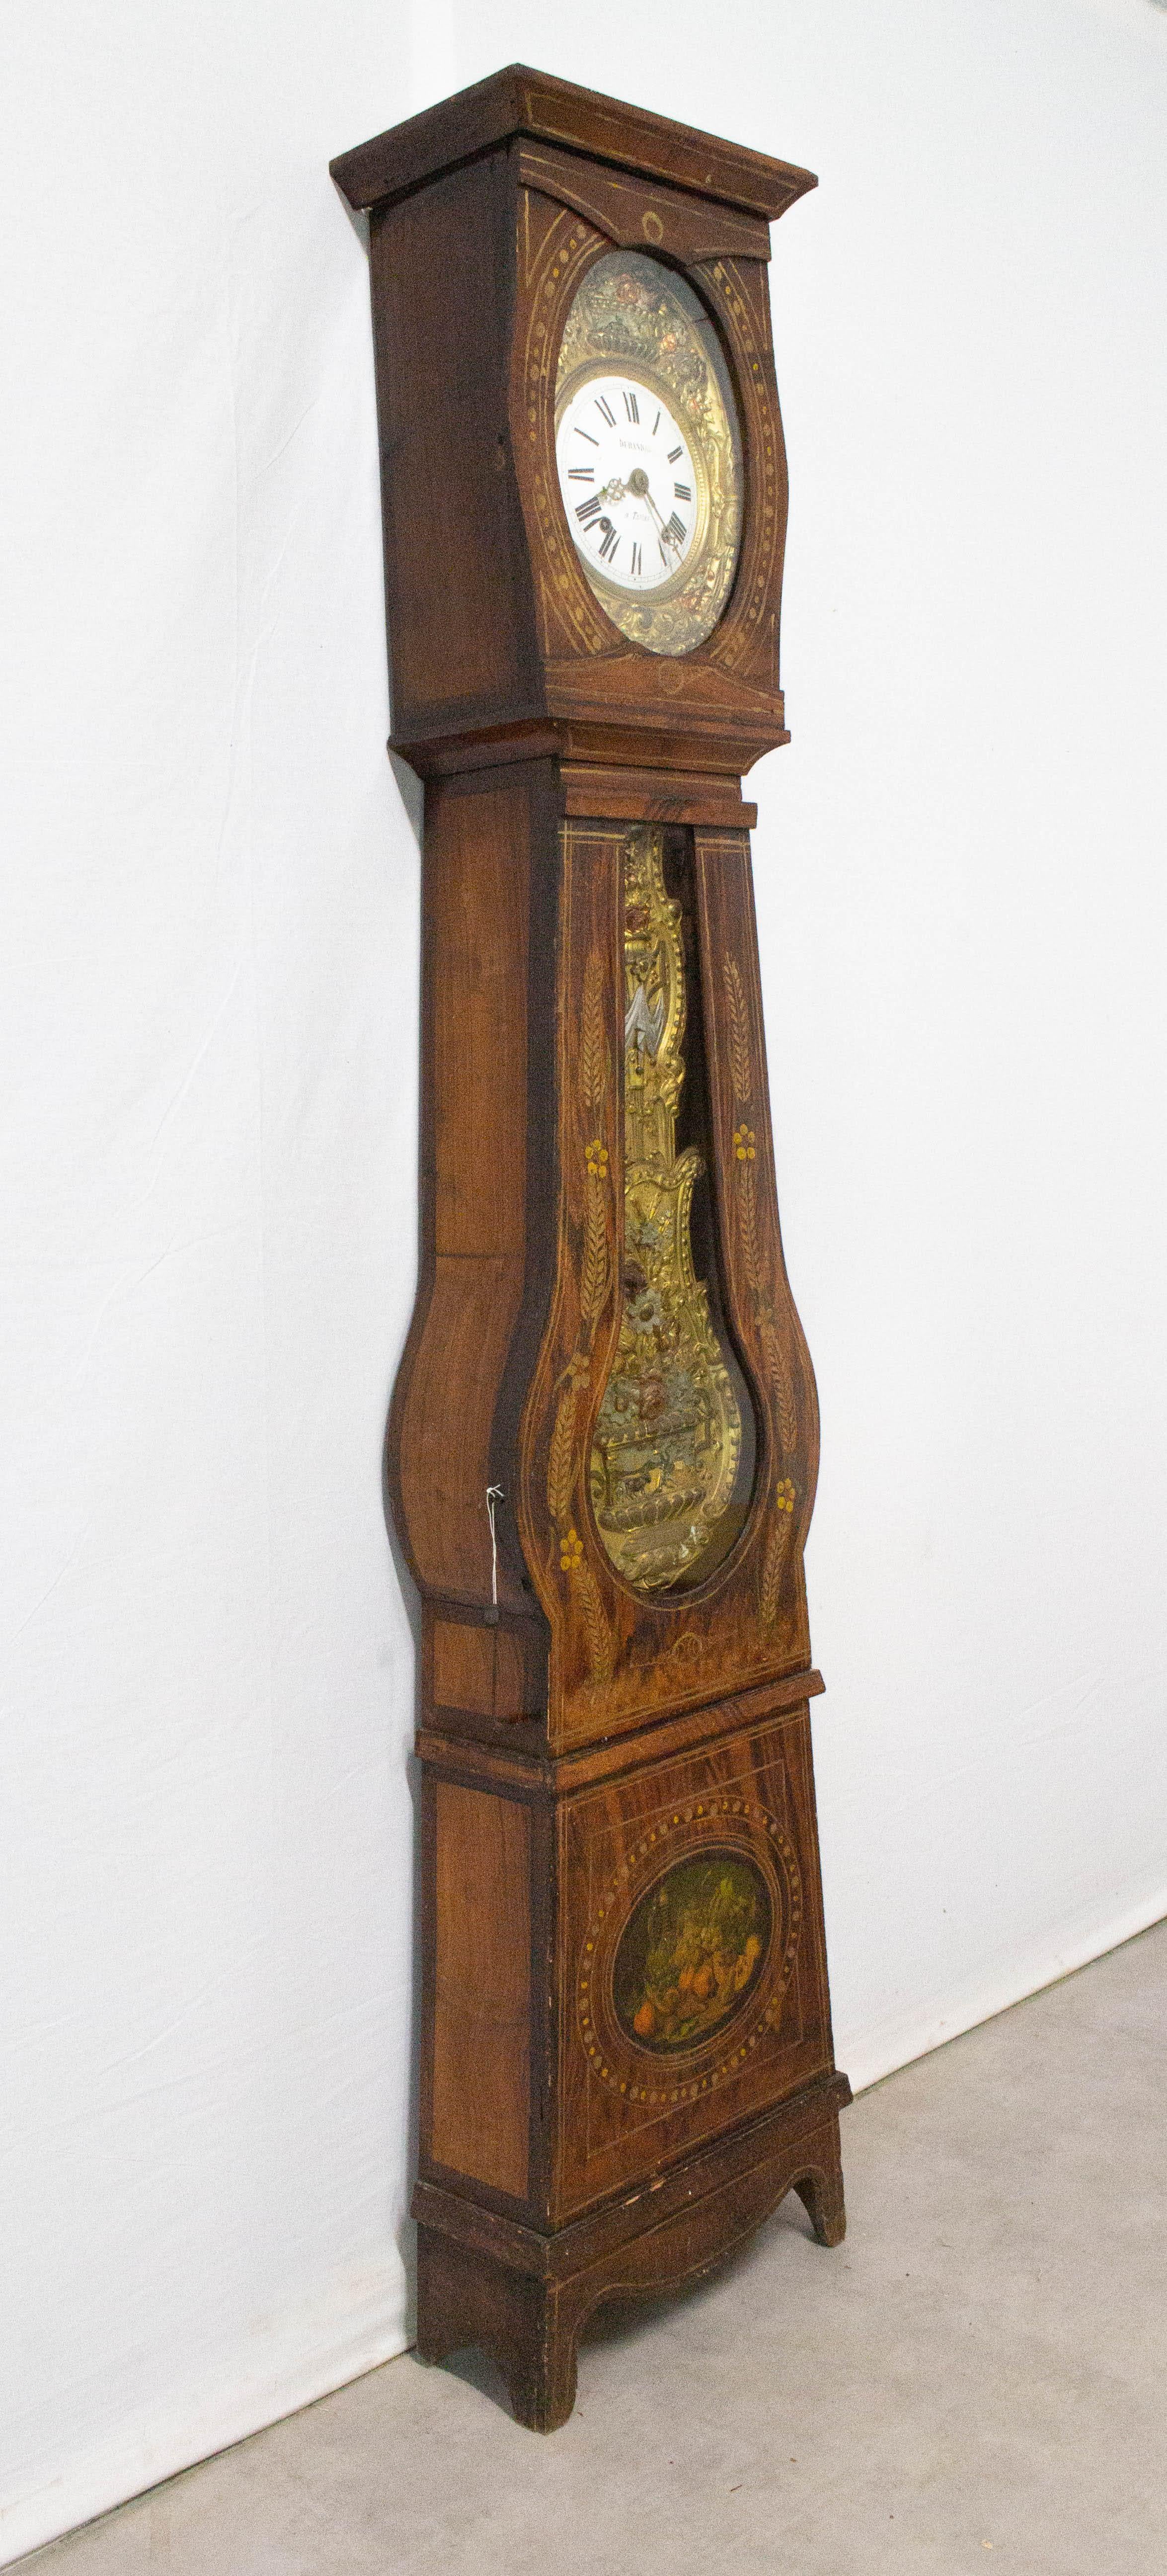 Grandfather clock or Comtoise from South of Bordeaux, France, Empire, 19th century.
The pendulum and clock surround are painted in Rococo style ornamentation, representing farm scenes.
The case with polychrome flower and ears of wheat decoration is